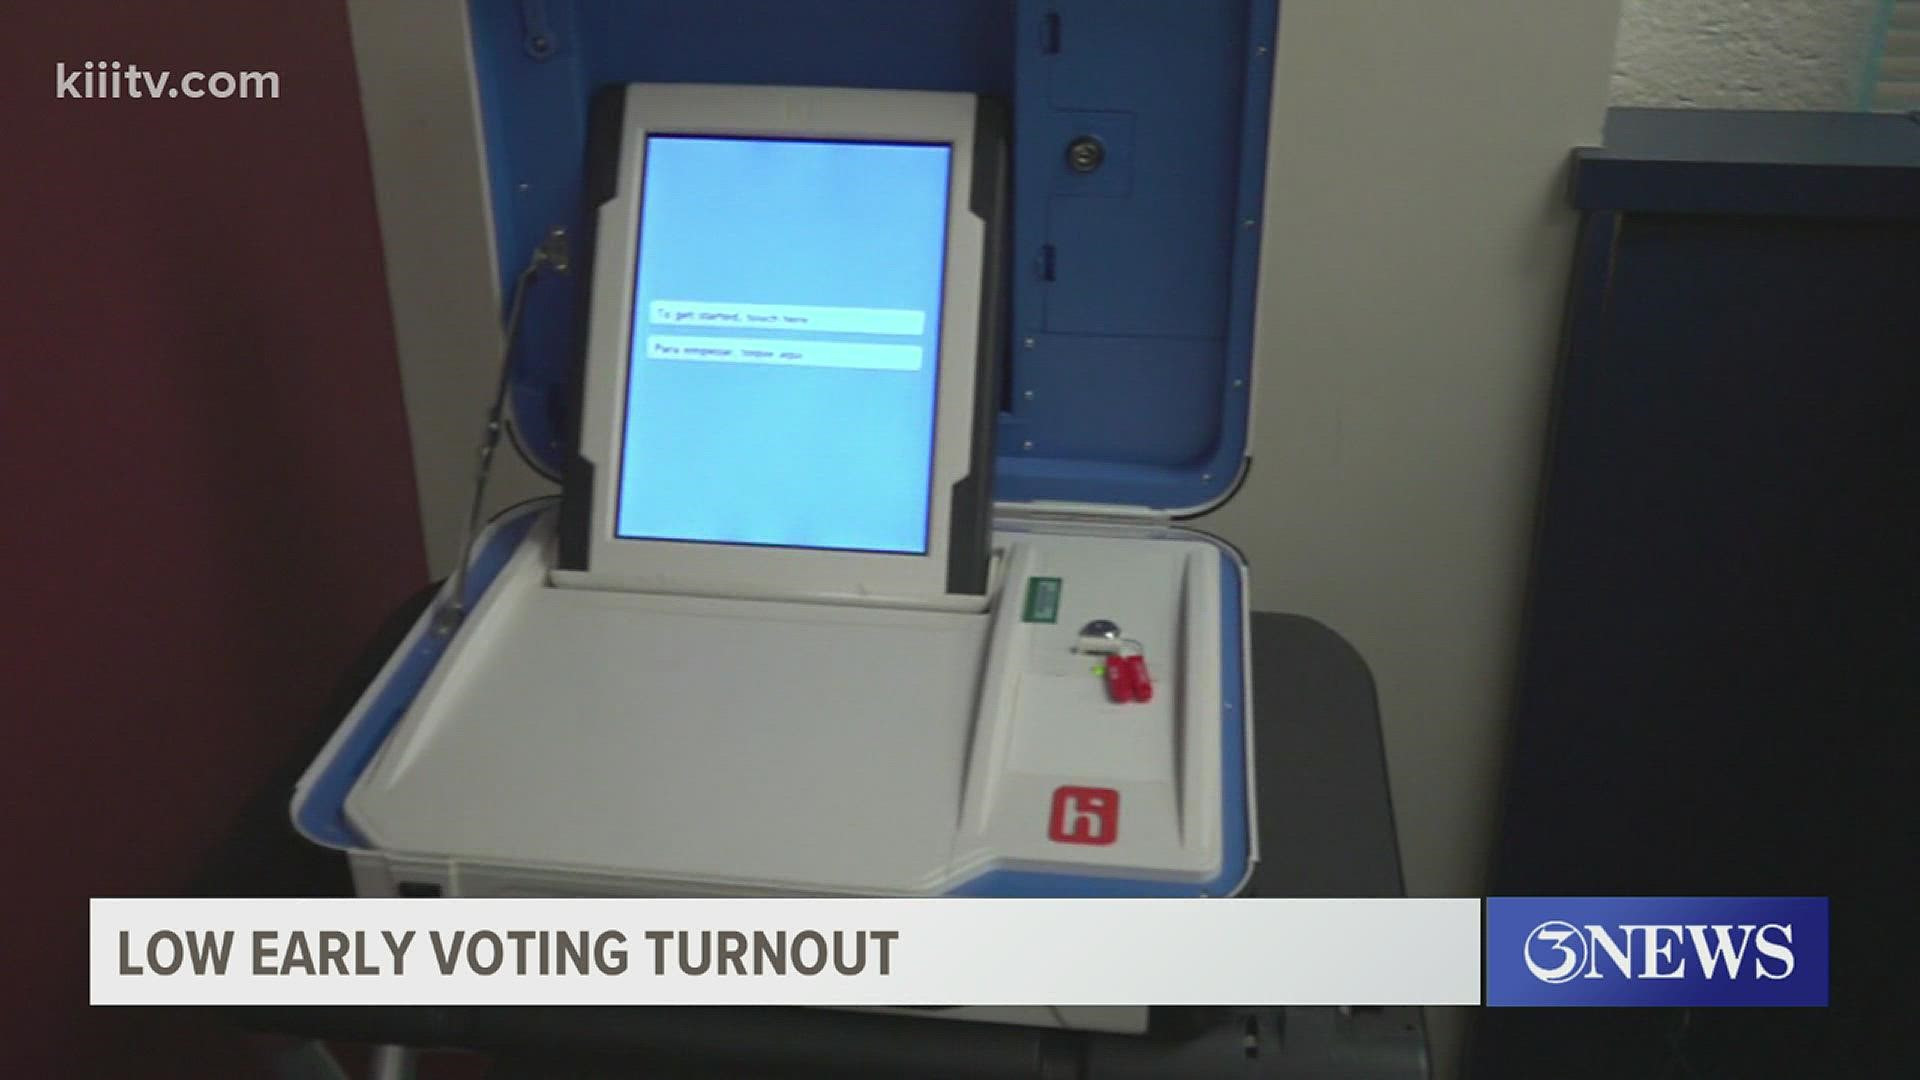 3News Bill Churchwell talked to voting officials to find out  Nueces County has experienced low voter turnout